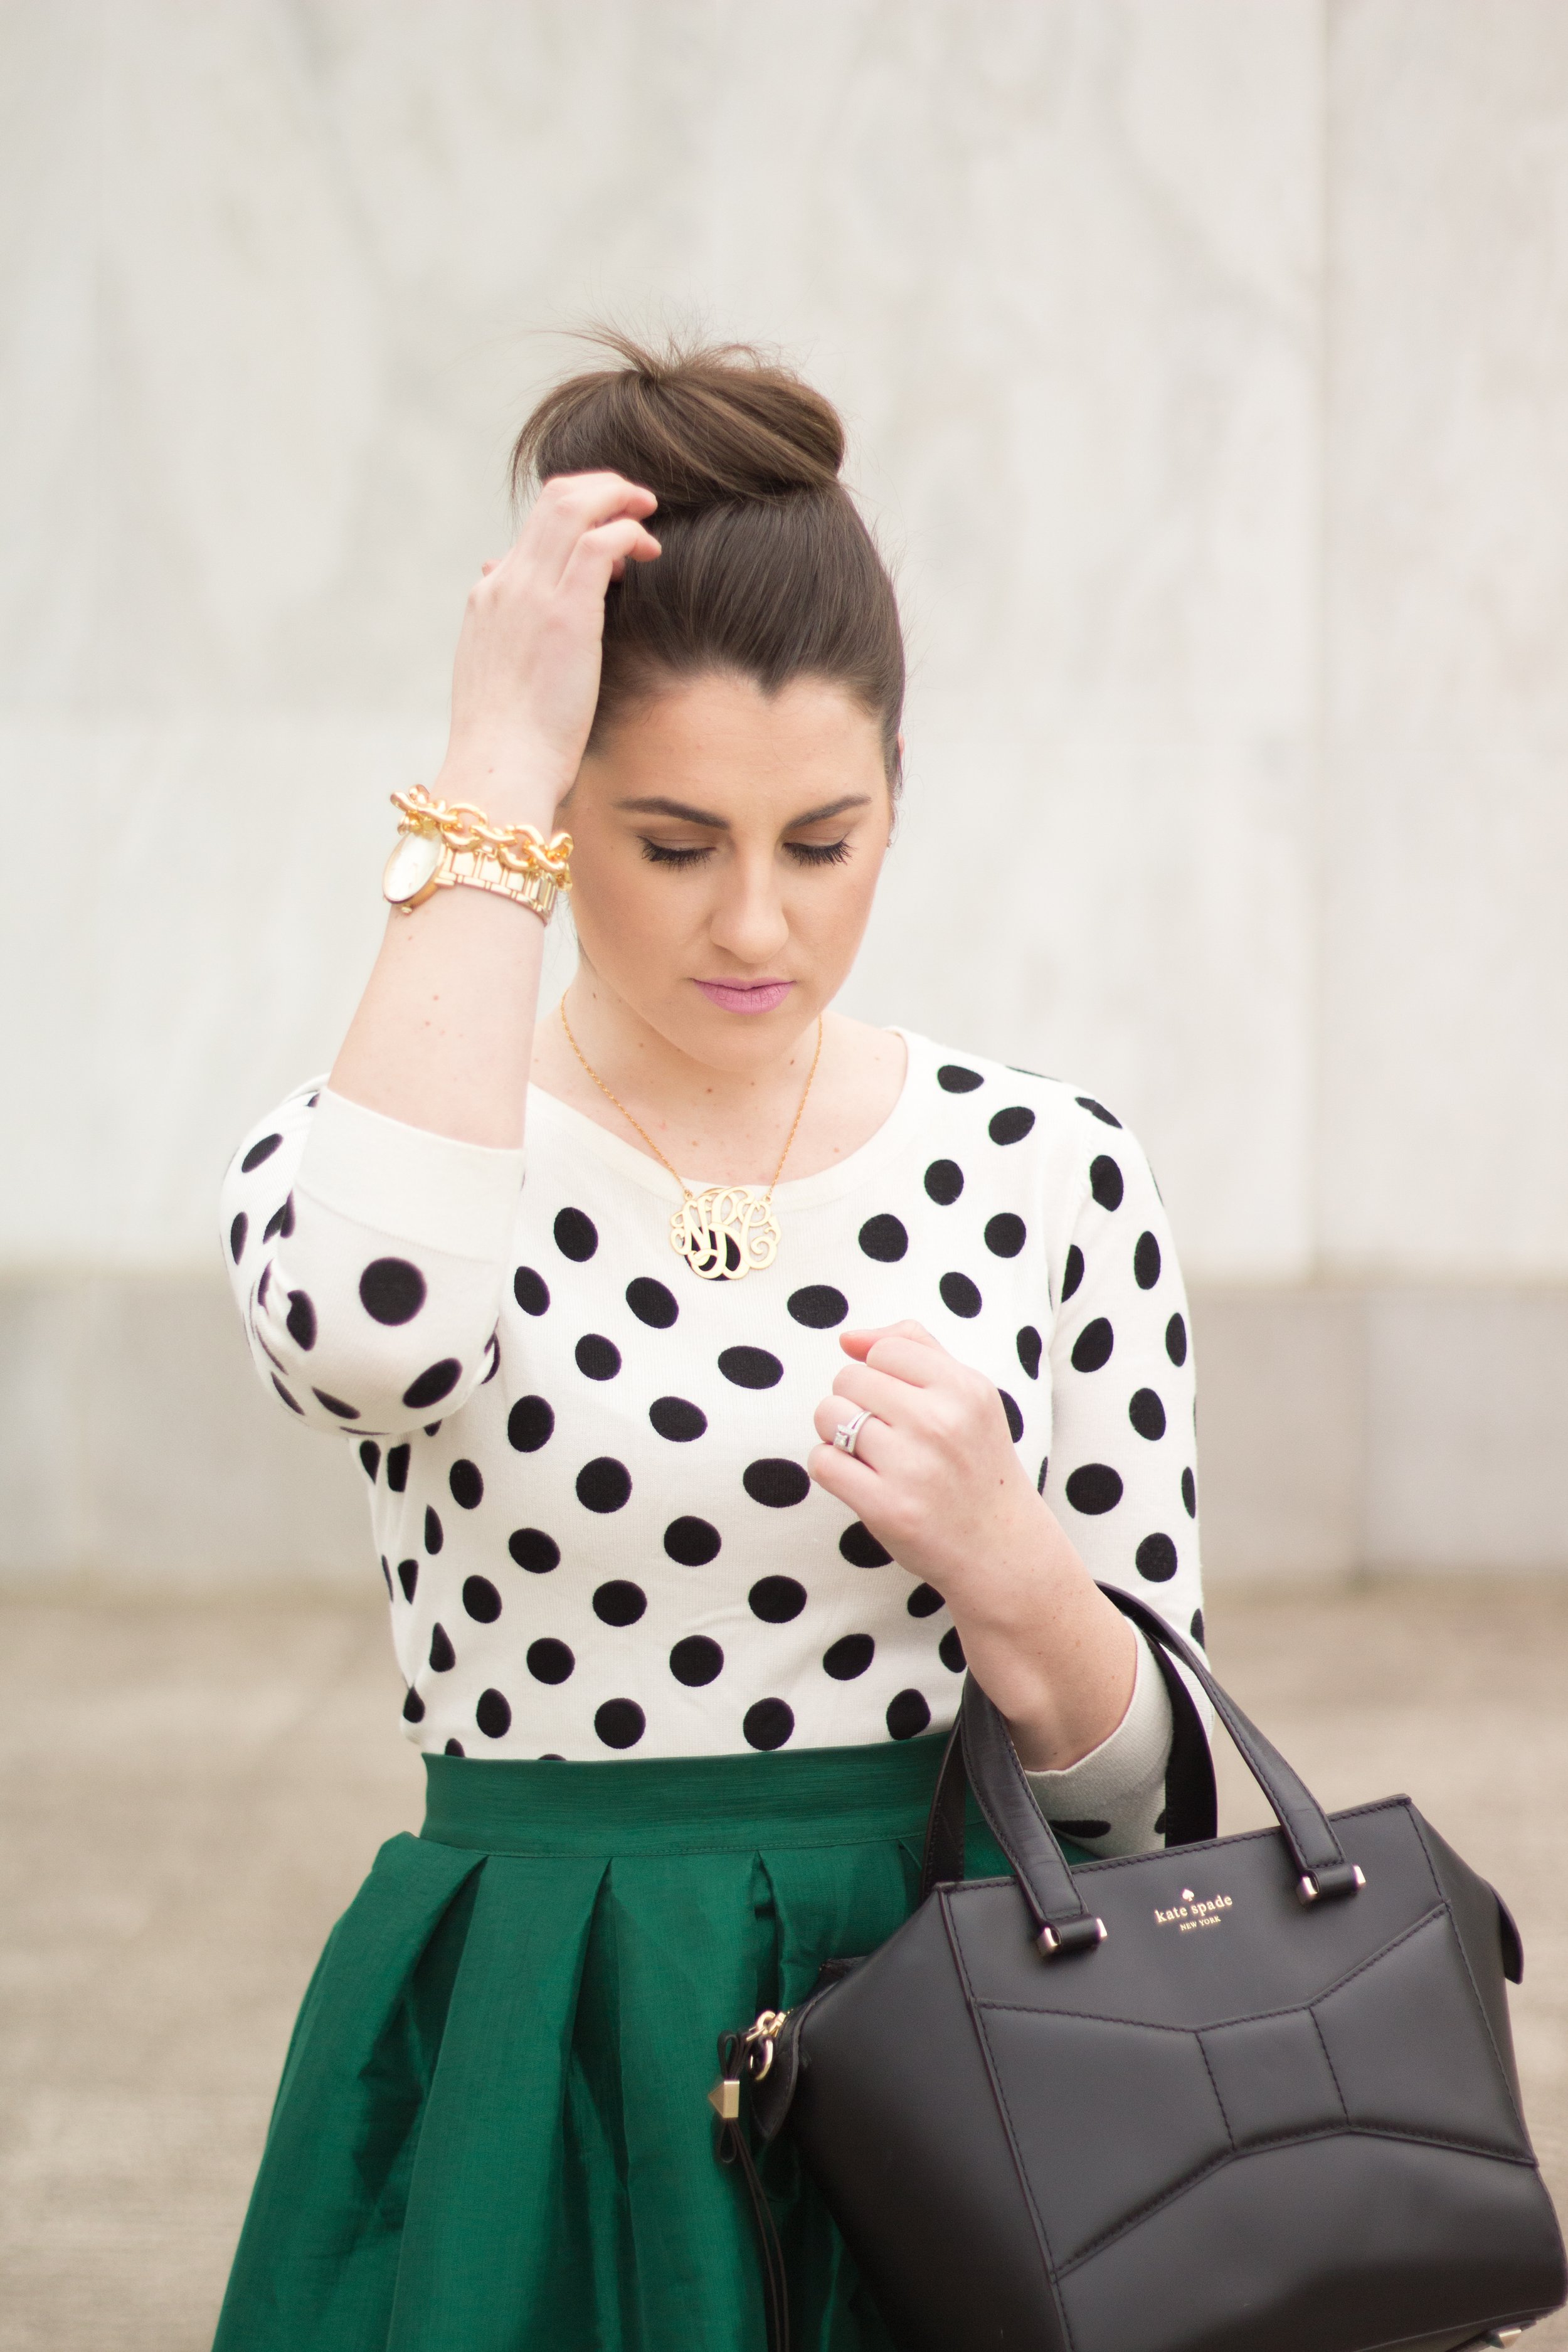 20 ways to dress Kate Spade inspired! - 20 Ways to wear Kate Spade Outfits by Portland fashion blogger Top Knots and Pearls